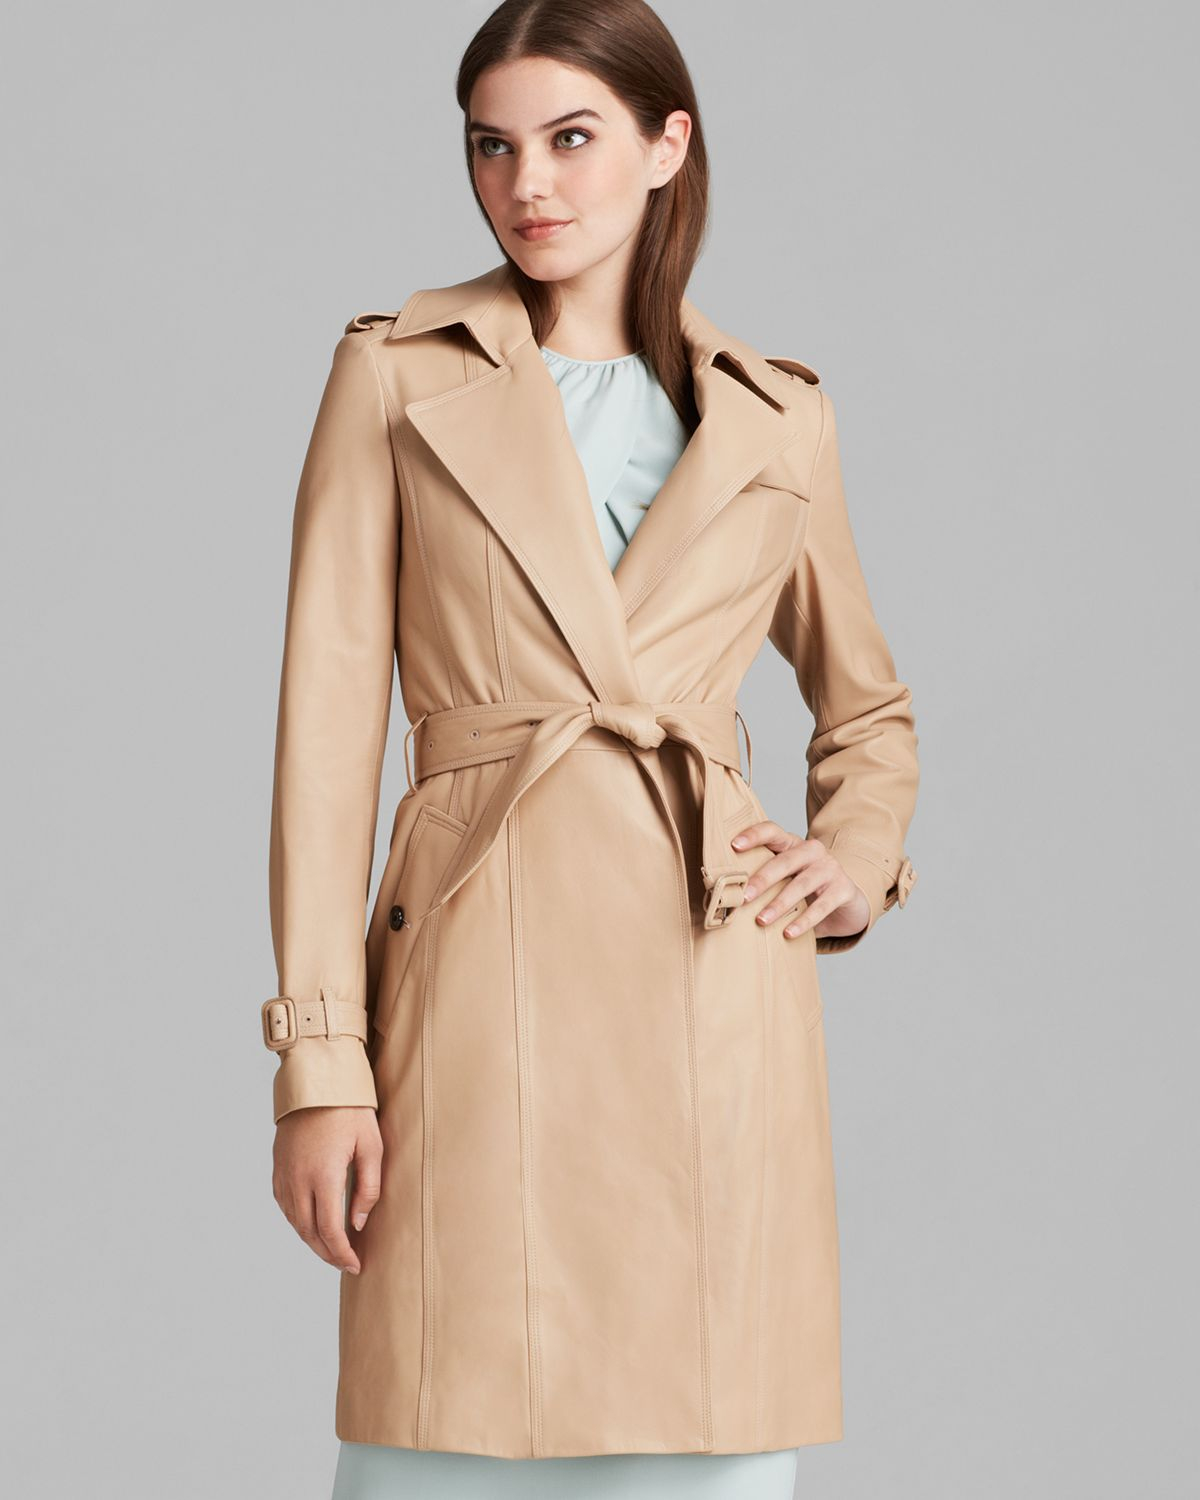 Burberry Coat Halefield Leather Trench in Beige (Nude) | Lyst